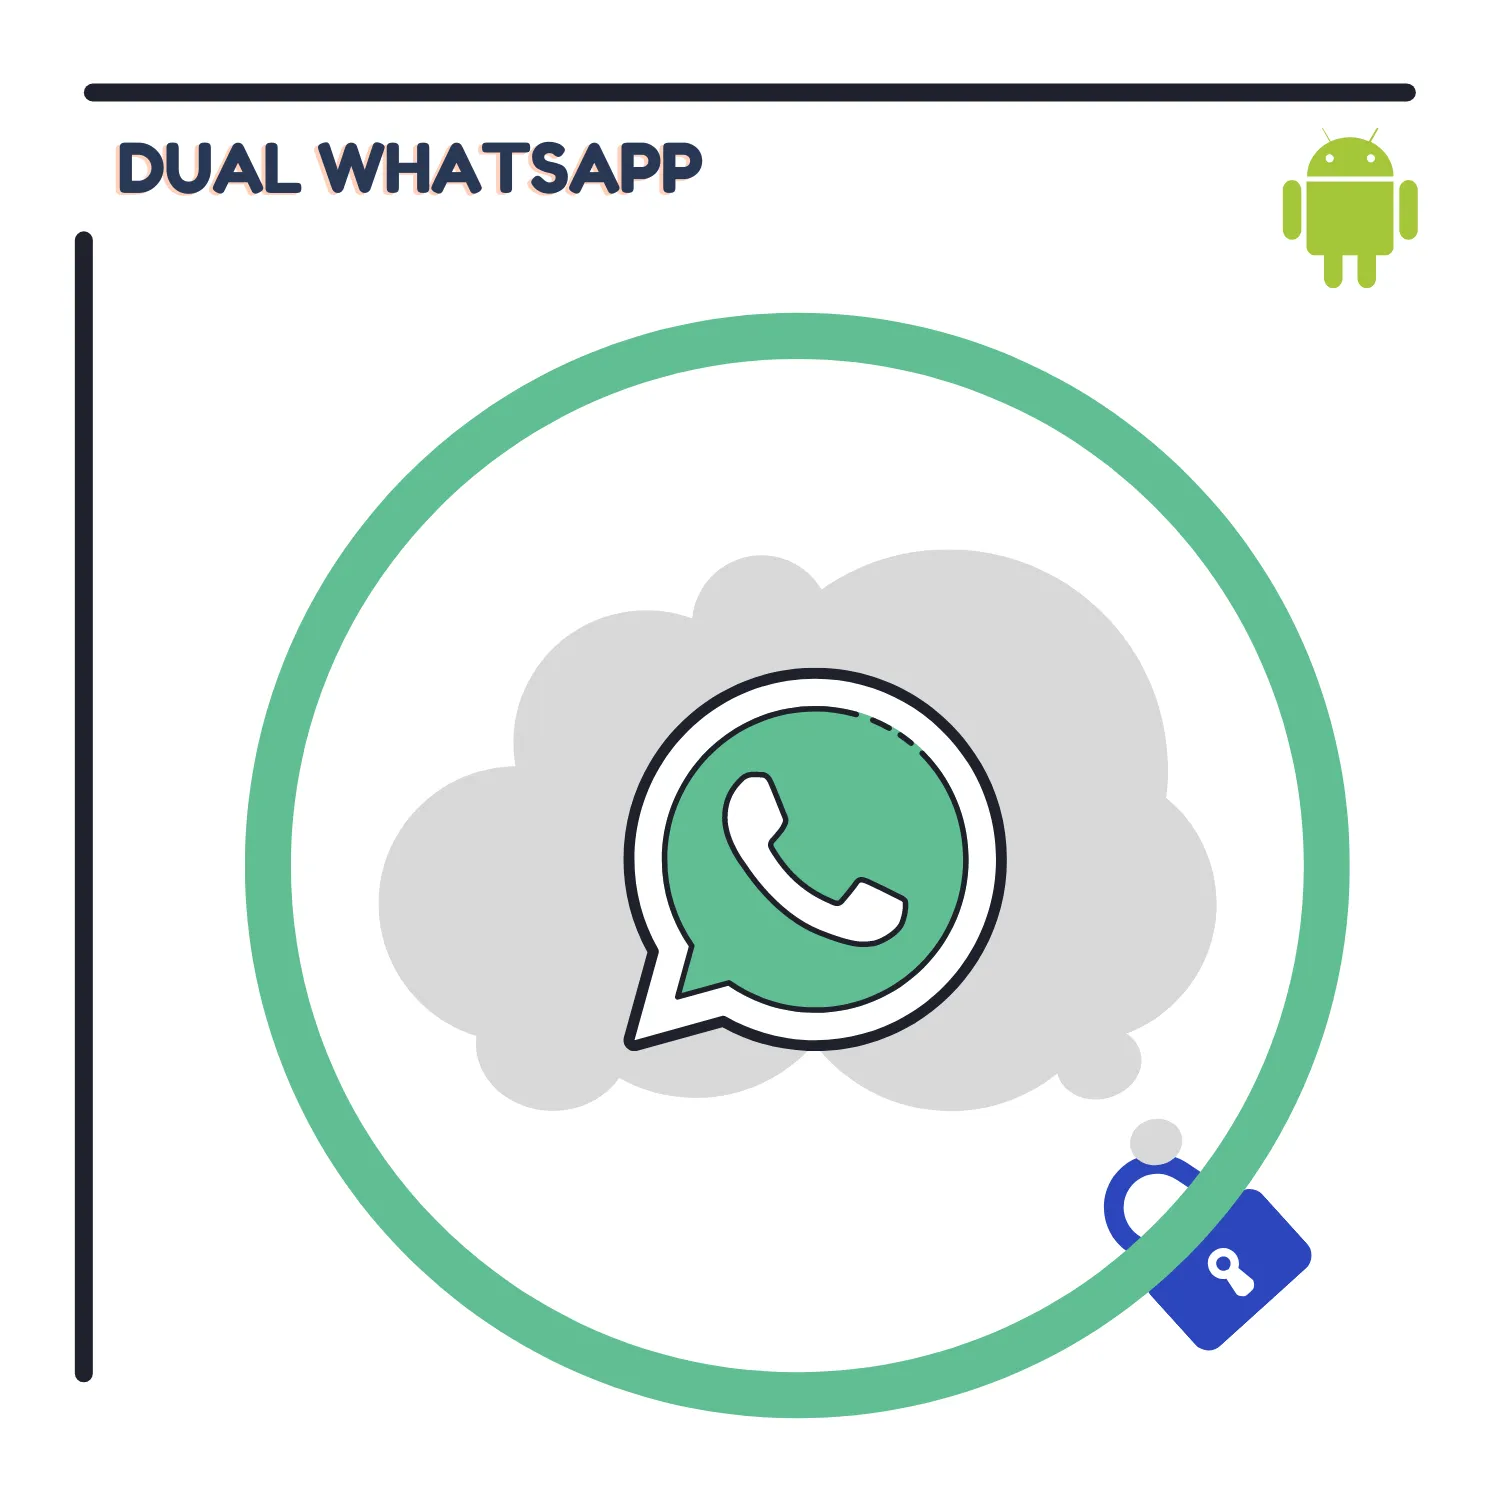 3 Best Ways to Use Dual WhatsApp on Android